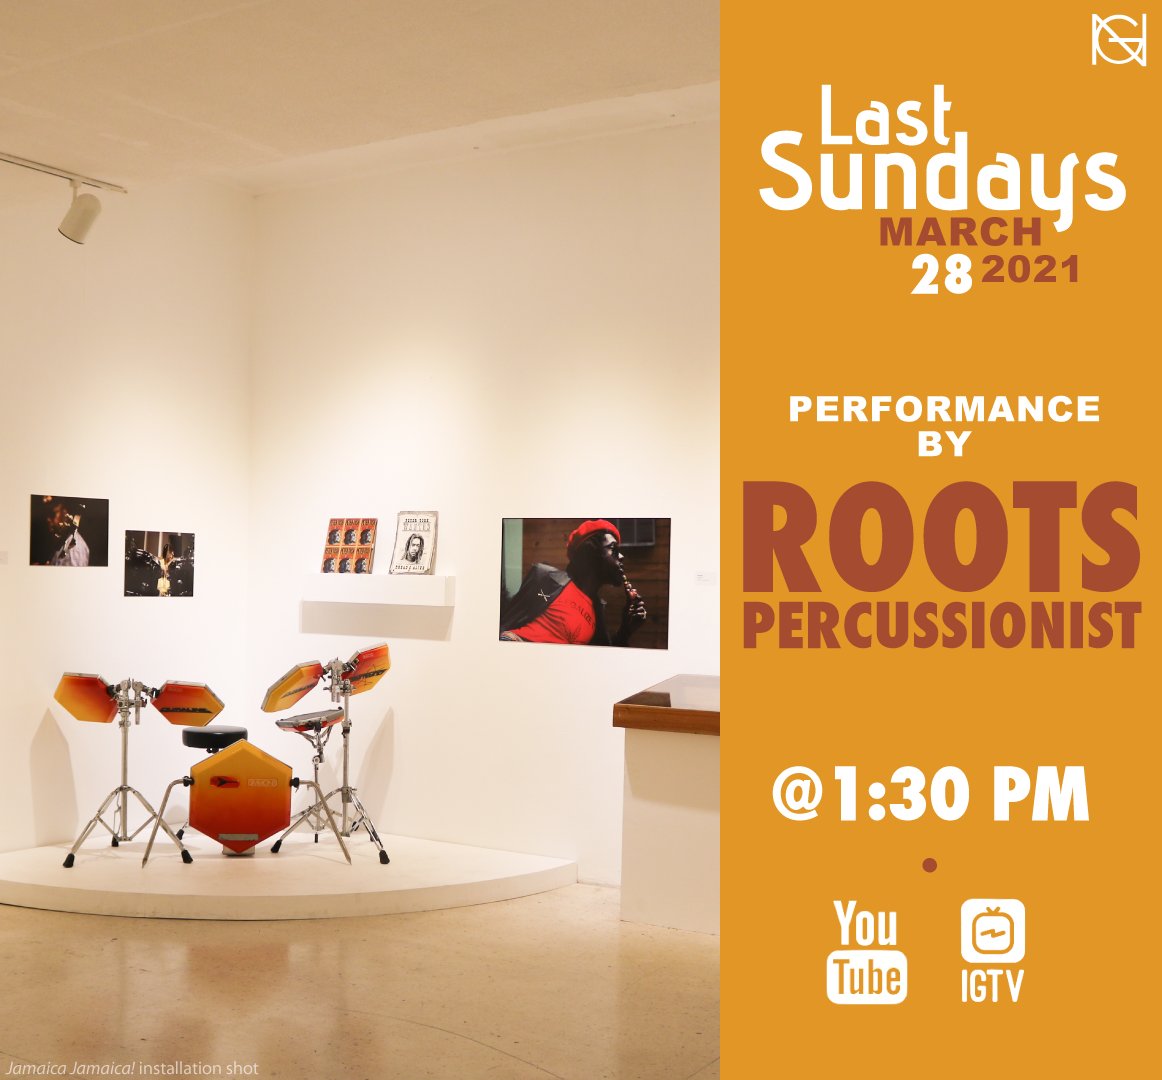 @natgalleryja presents its Virtual Last Sundays with a performance by @RootsLewis. 

Tune in on March 28, 2021 at 1:30pm on IGTV or on their YouTube channel for some afternoon vibes. 

#ngj #nationalgalleryofjamaica #rootspercussionist #jamaicantalent #lastsundays